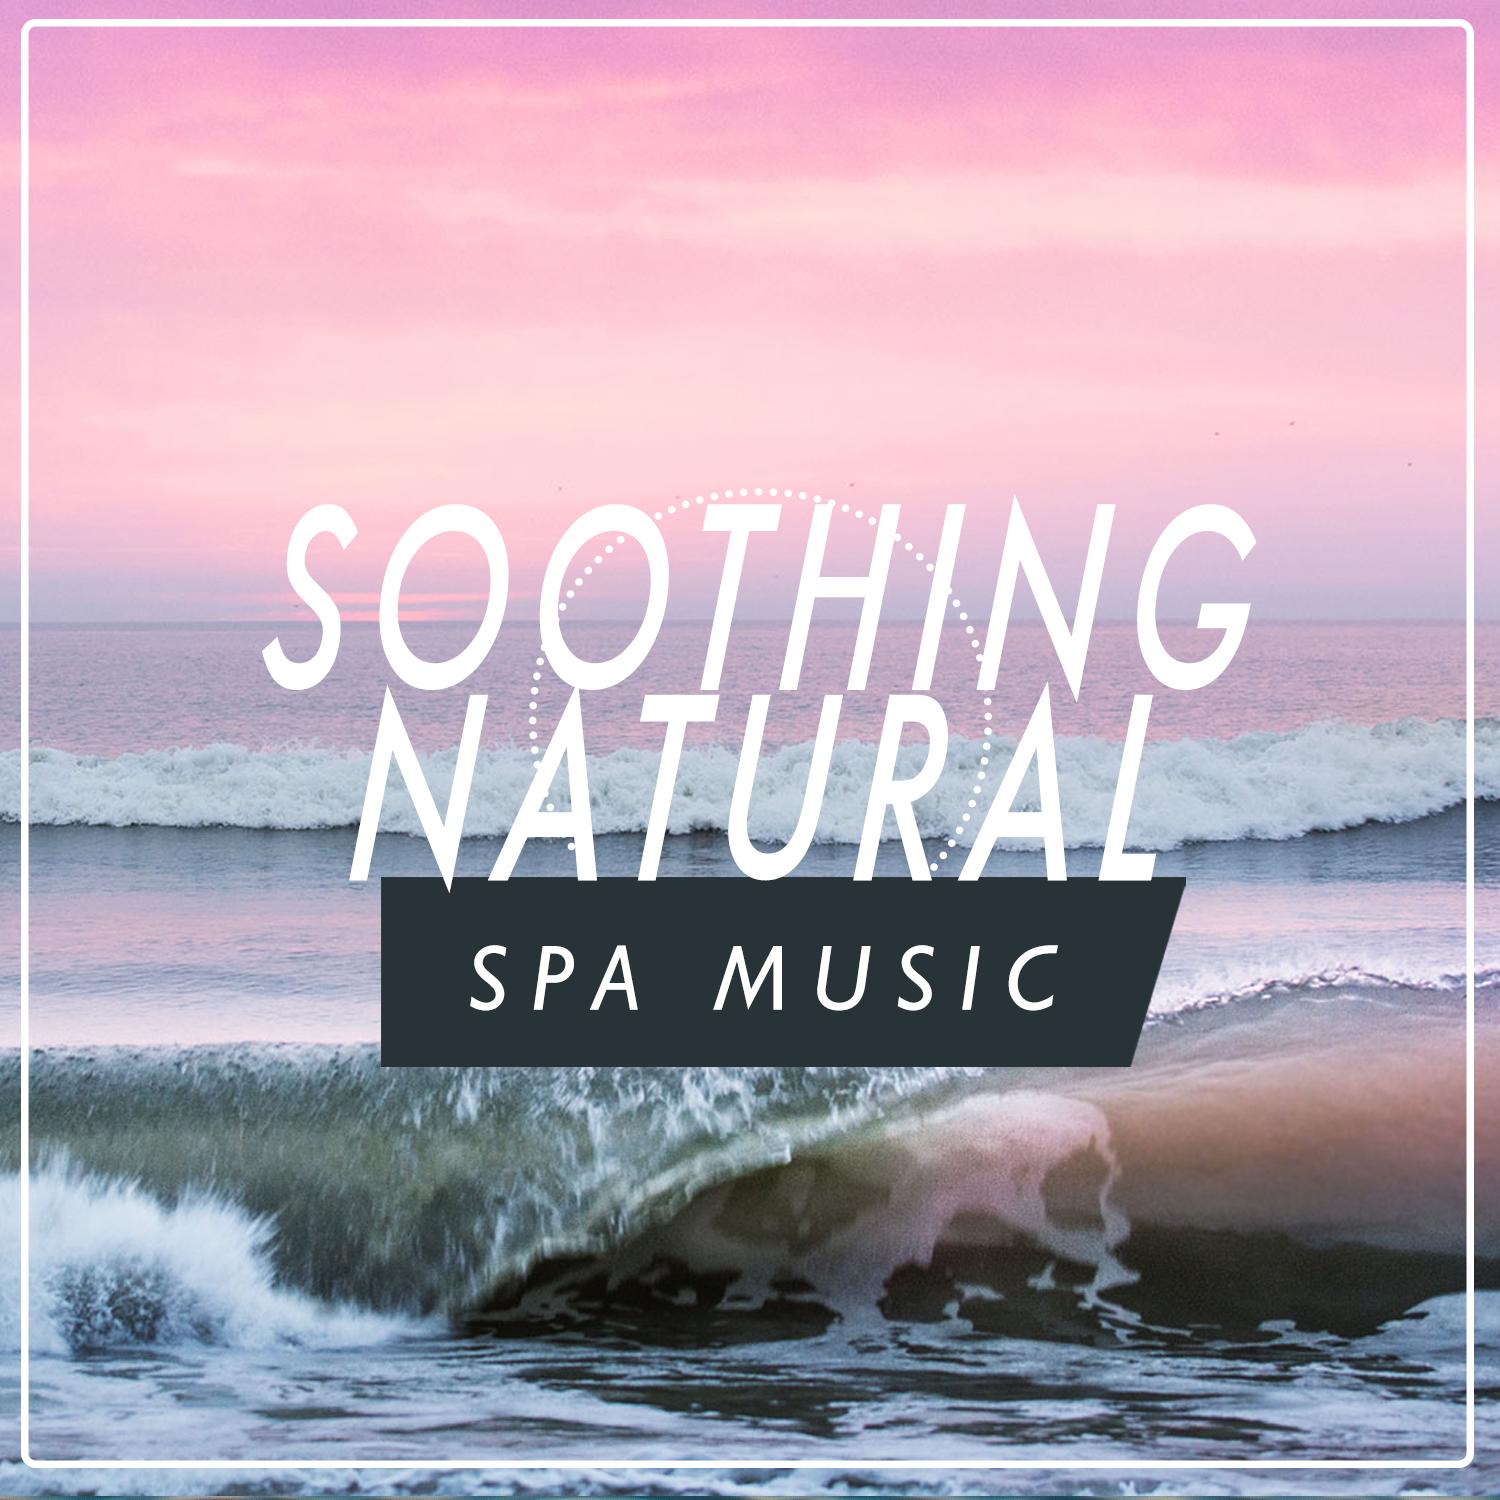 Soothing Natural Spa Music